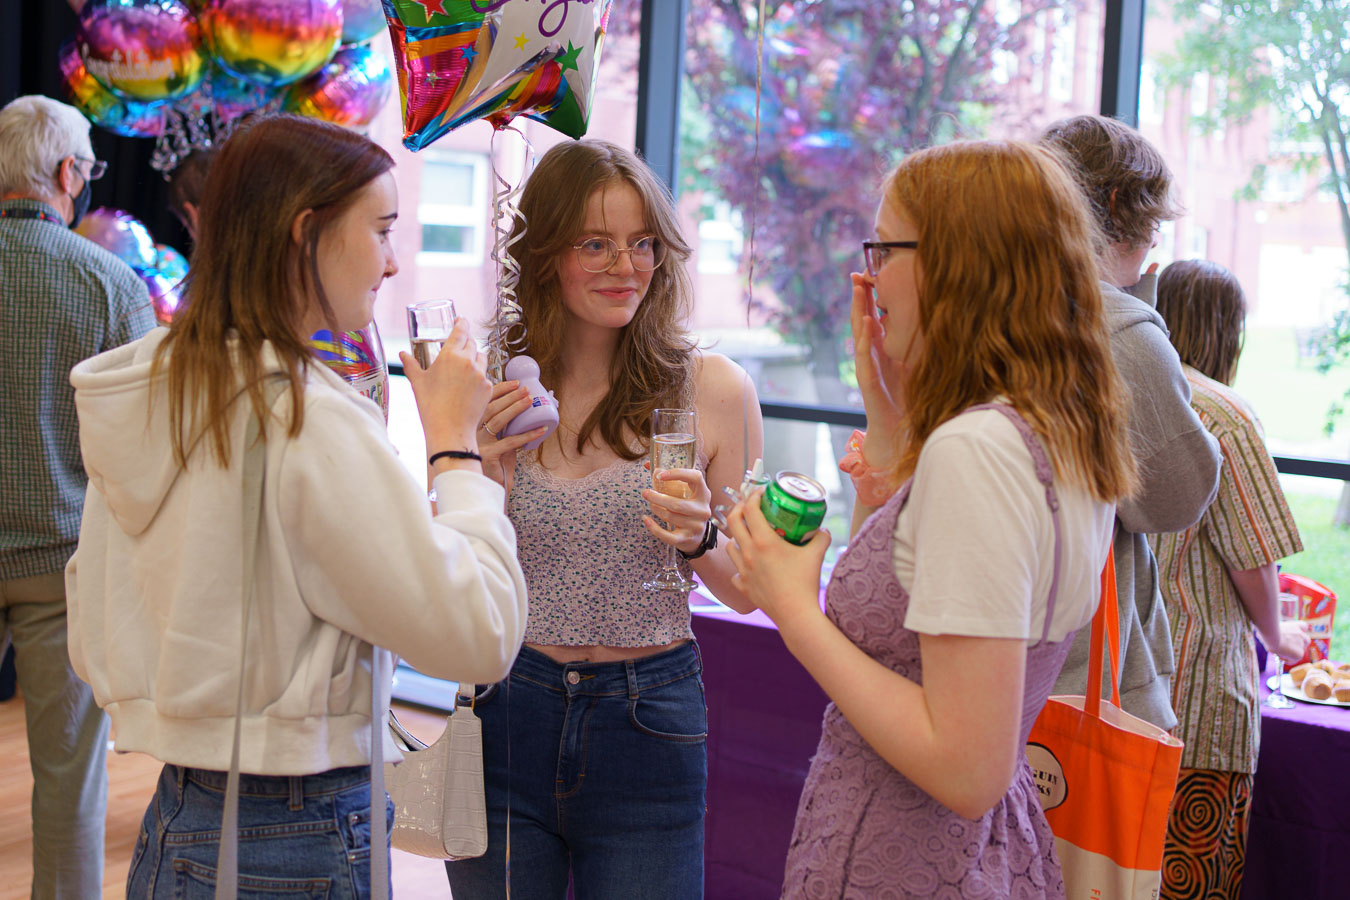 Students gather at College to celebrate their success with friends and tutors